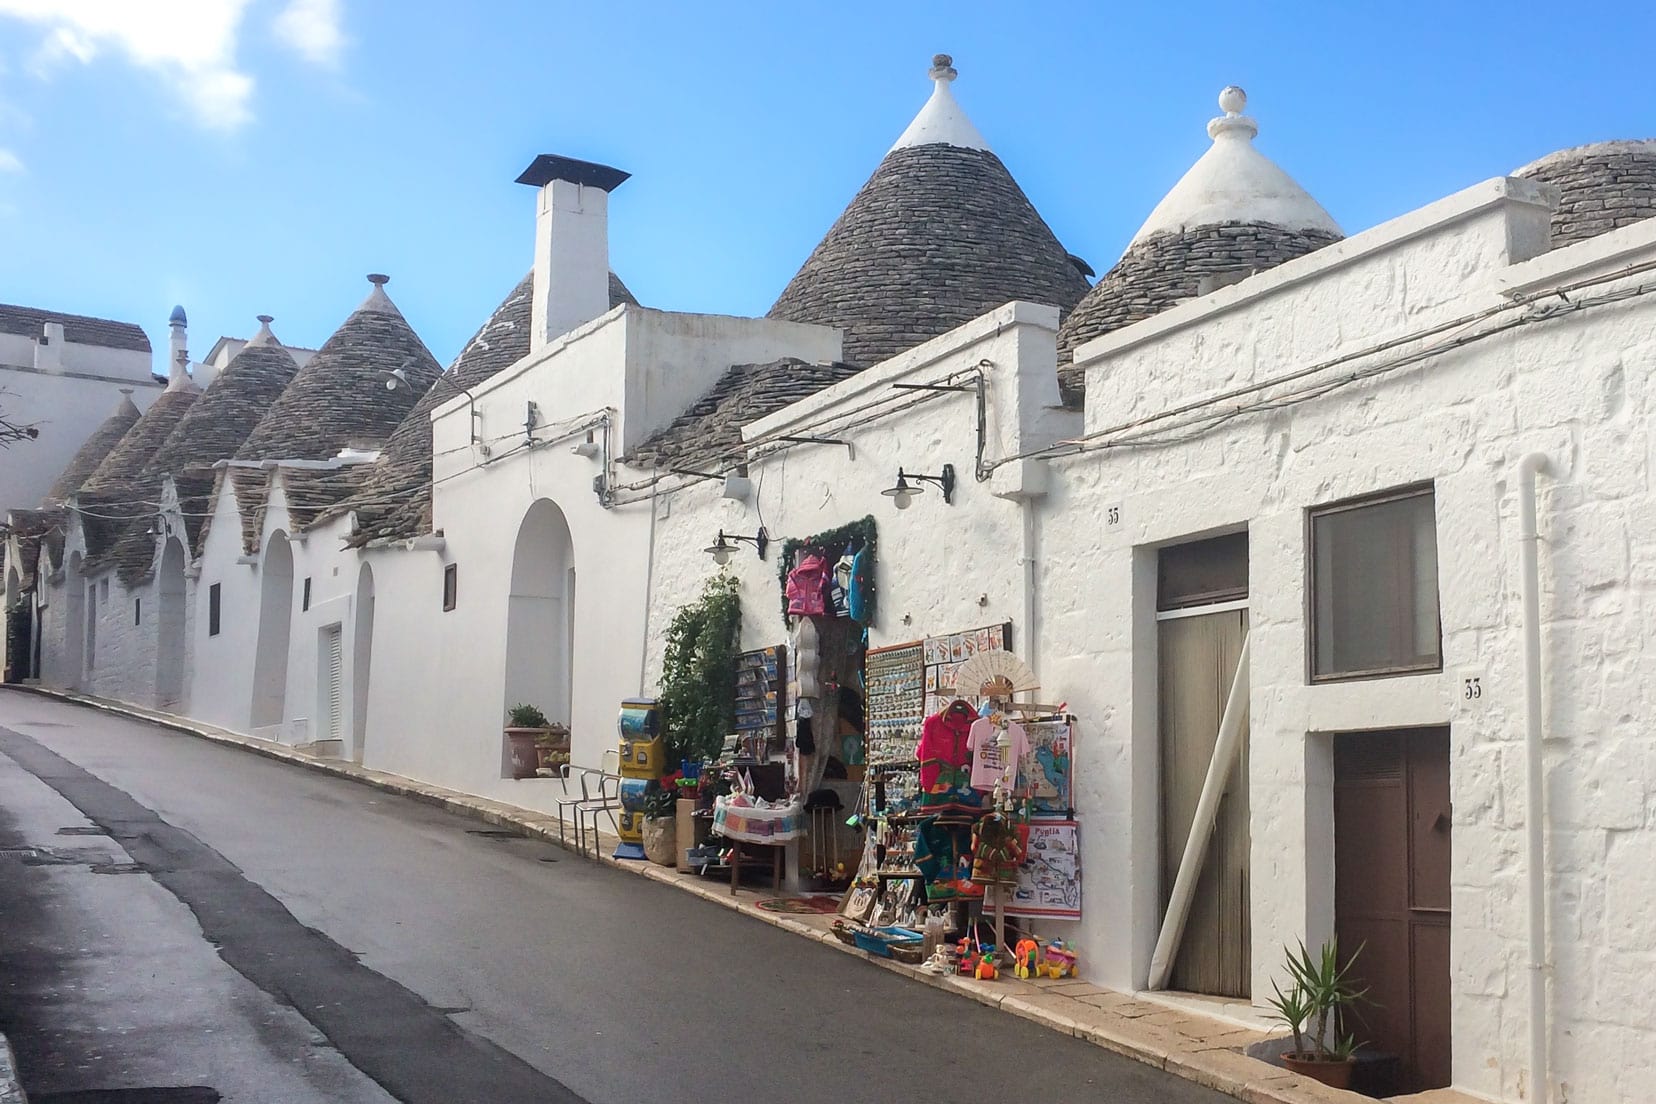 Trulli in the rione monti area with one decorated outside wth lots of wares fro sale icluding teshirts, magnets, toys